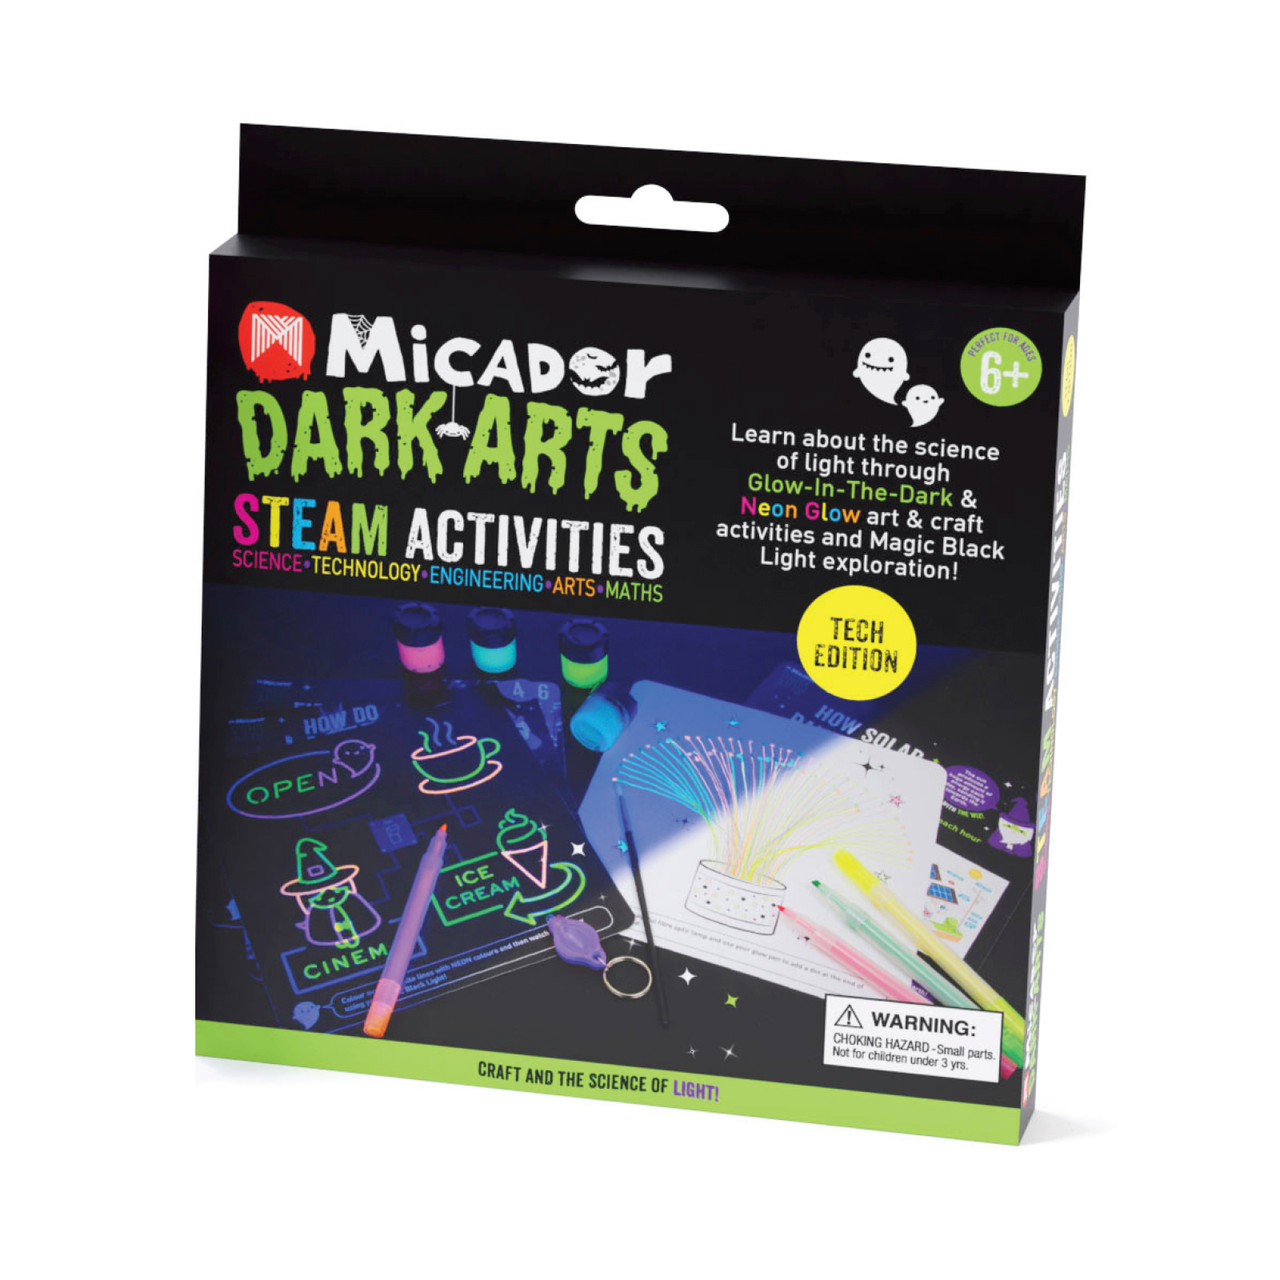 Exercises for Young Children on the Glow Art Kids Drawing Board